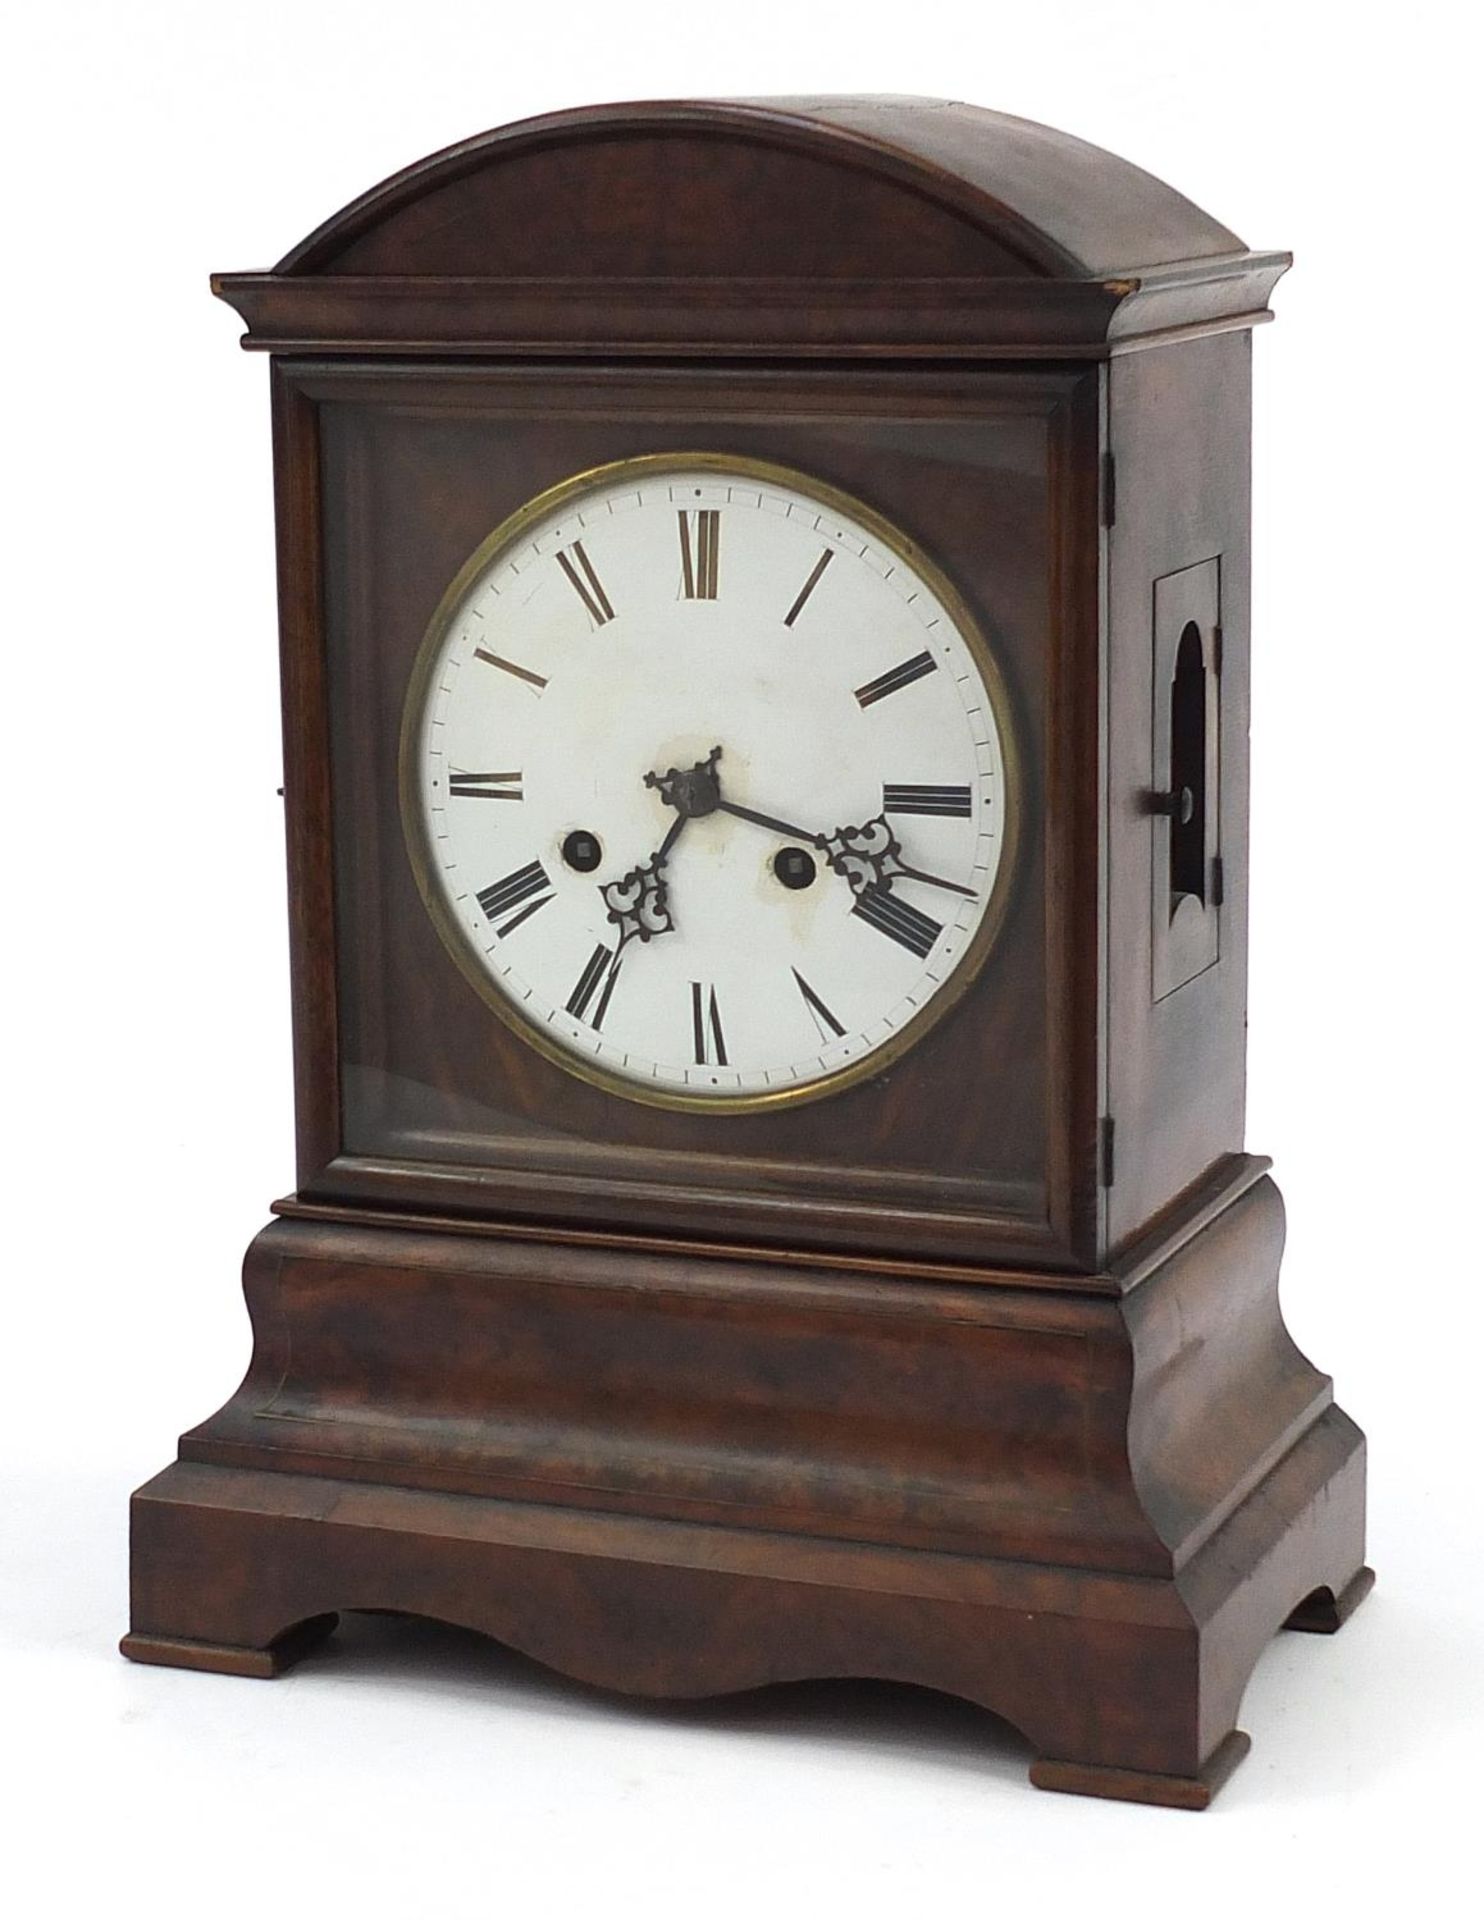 German inlaid walnut dome top bracket clock with twin fusee movement, the enamelled dial having